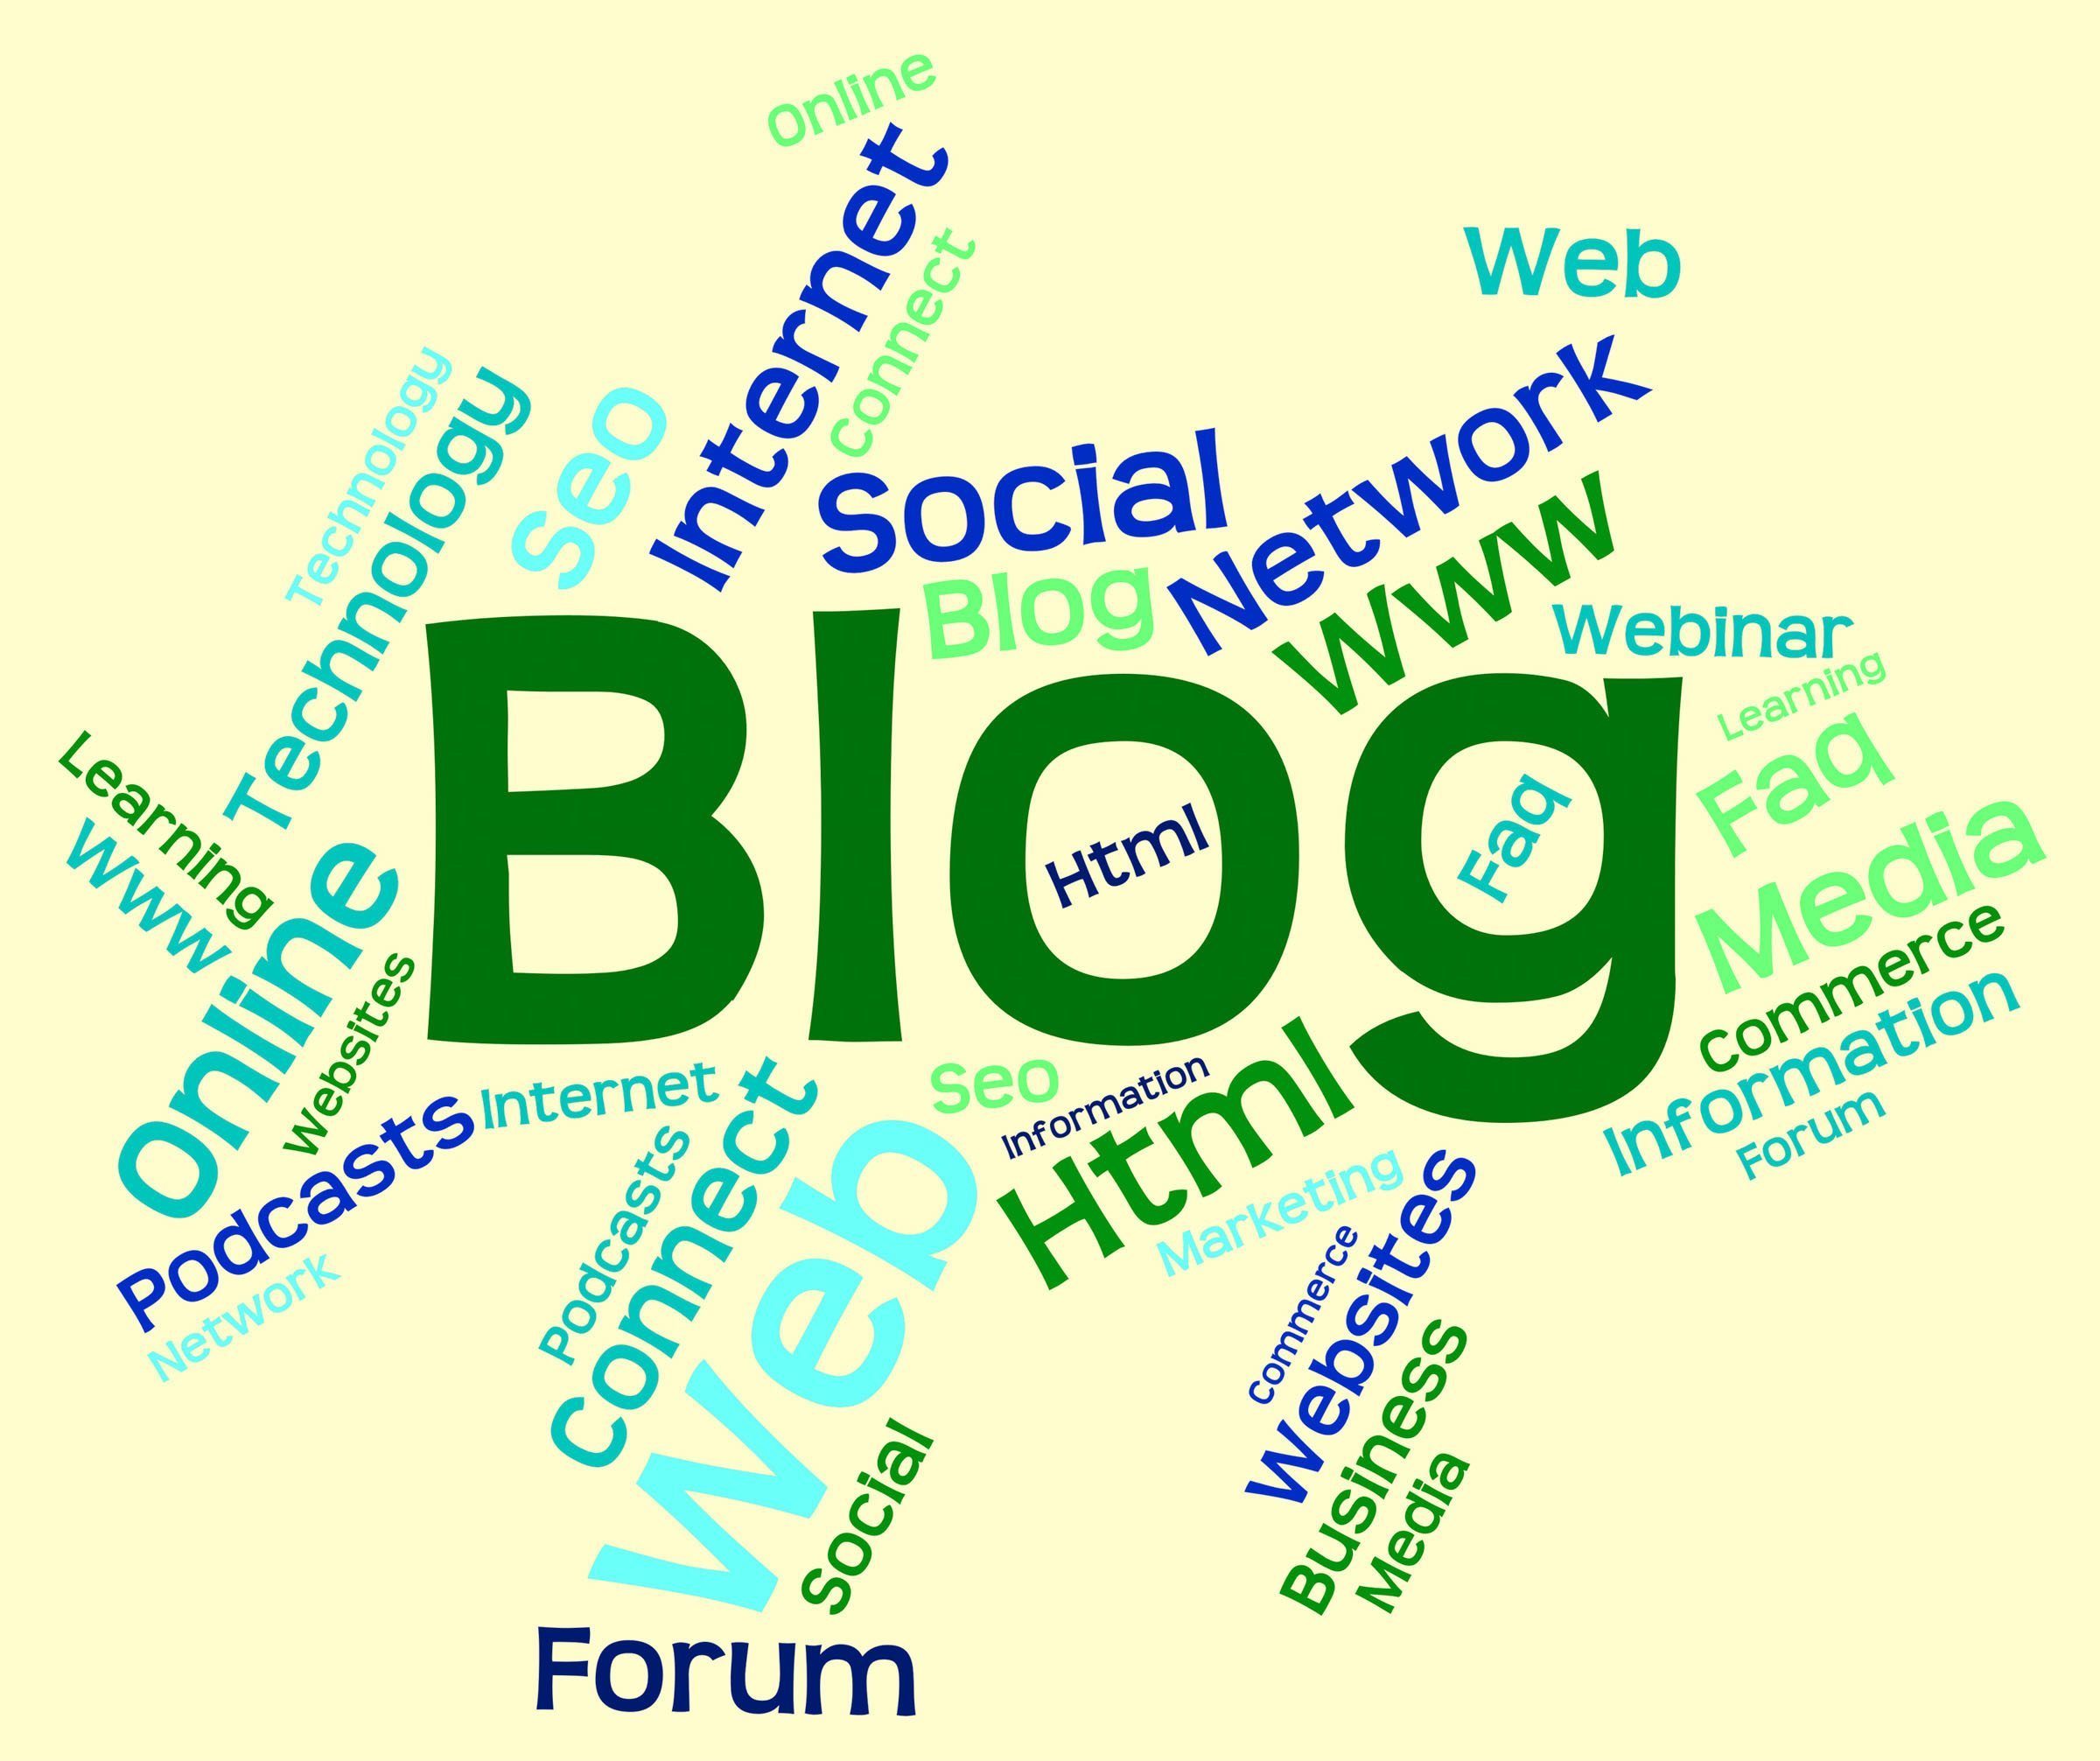 Blog Word - Showing Words Online And Site